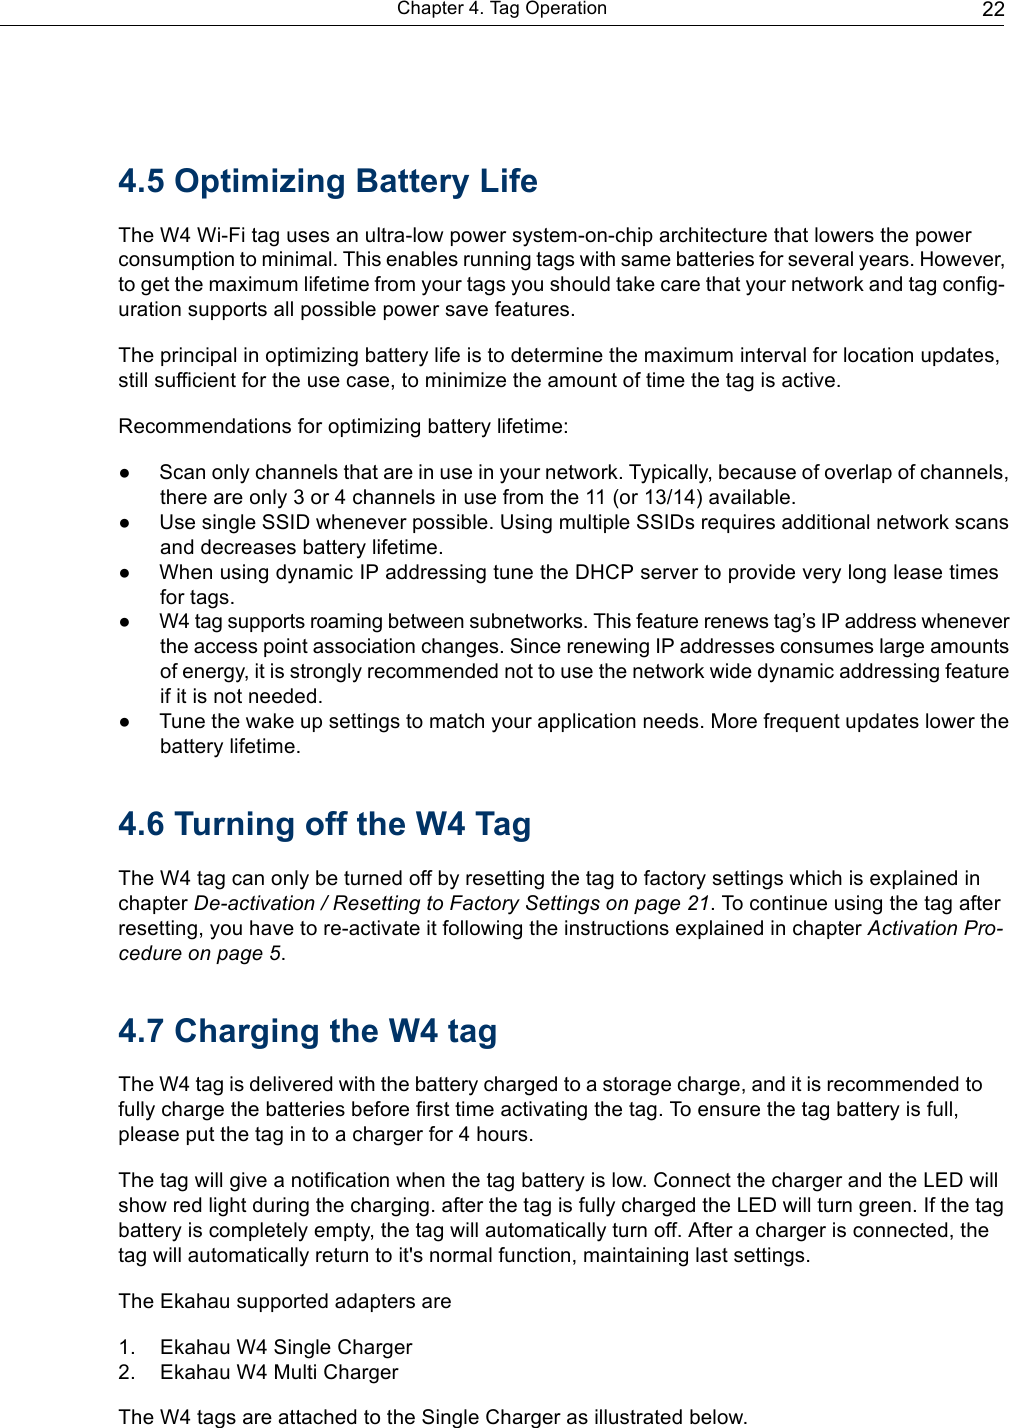   Chapter 4. Tag Operation                                                                       22        4.5 Optimizing Battery Life  The W4 Wi-Fi tag uses an ultra-low power system-on-chip architecture that lowers the power consumption to minimal. This enables running tags with same batteries for several years. However, to get the maximum lifetime from your tags you should take care that your network and tag config- uration supports all possible power save features.  The principal in optimizing battery life is to determine the maximum interval for location updates, still sufficient for the use case, to minimize the amount of time the tag is active.  Recommendations for optimizing battery lifetime:  ● Scan only channels that are in use in your network. Typically, because of overlap of channels, there are only 3 or 4 channels in use from the 11 (or 13/14) available. ● Use single SSID whenever possible. Using multiple SSIDs requires additional network scans and decreases battery lifetime. ● When using dynamic IP addressing tune the DHCP server to provide very long lease times for tags. ●  W4 tag supports roaming between subnetworks. This feature renews tag’s IP address whenever the access point association changes. Since renewing IP addresses consumes large amounts of energy, it is strongly recommended not to use the network wide dynamic addressing feature if it is not needed. ●  Tune the wake up settings to match your application needs. More frequent updates lower the battery lifetime.   4.6 Turning off the W4 Tag  The W4 tag can only be turned off by resetting the tag to factory settings which is explained in chapter De-activation / Resetting to Factory Settings on page 21. To continue using the tag after resetting, you have to re-activate it following the instructions explained in chapter Activation Pro- cedure on page 5.   4.7 Charging the W4 tag  The W4 tag is delivered with the battery charged to a storage charge, and it is recommended to fully charge the batteries before first time activating the tag. To ensure the tag battery is full, please put the tag in to a charger for 4 hours.  The tag will give a notification when the tag battery is low. Connect the charger and the LED will show red light during the charging. after the tag is fully charged the LED will turn green. If the tag battery is completely empty, the tag will automatically turn off. After a charger is connected, the tag will automatically return to it&apos;s normal function, maintaining last settings.  The Ekahau supported adapters are  1.    Ekahau W4 Single Charger 2.    Ekahau W4 Multi Charger  The W4 tags are attached to the Single Charger as illustrated below. 